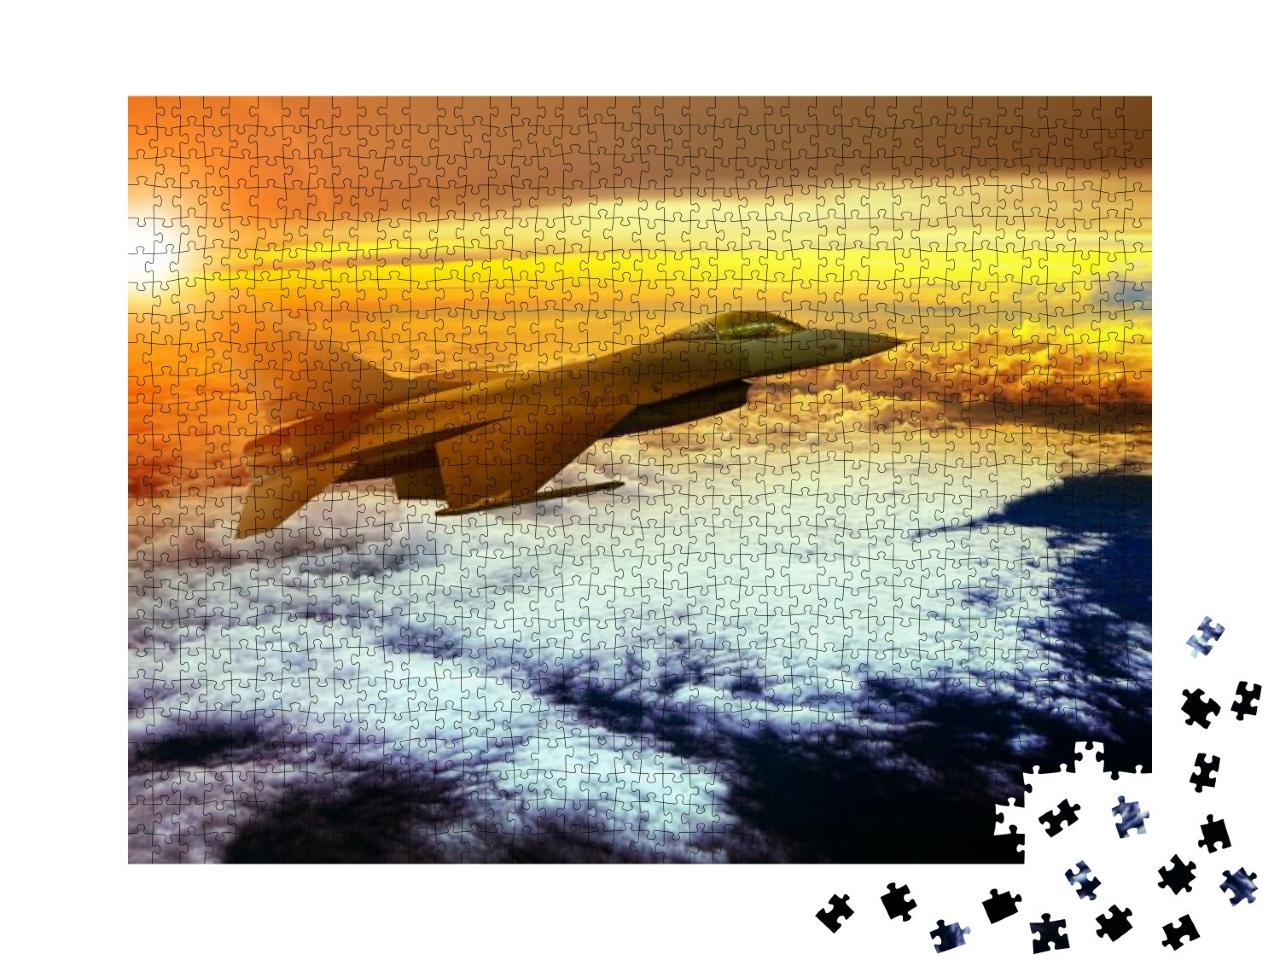 Military Plane Flying Over Cloud Scape... Jigsaw Puzzle with 1000 pieces